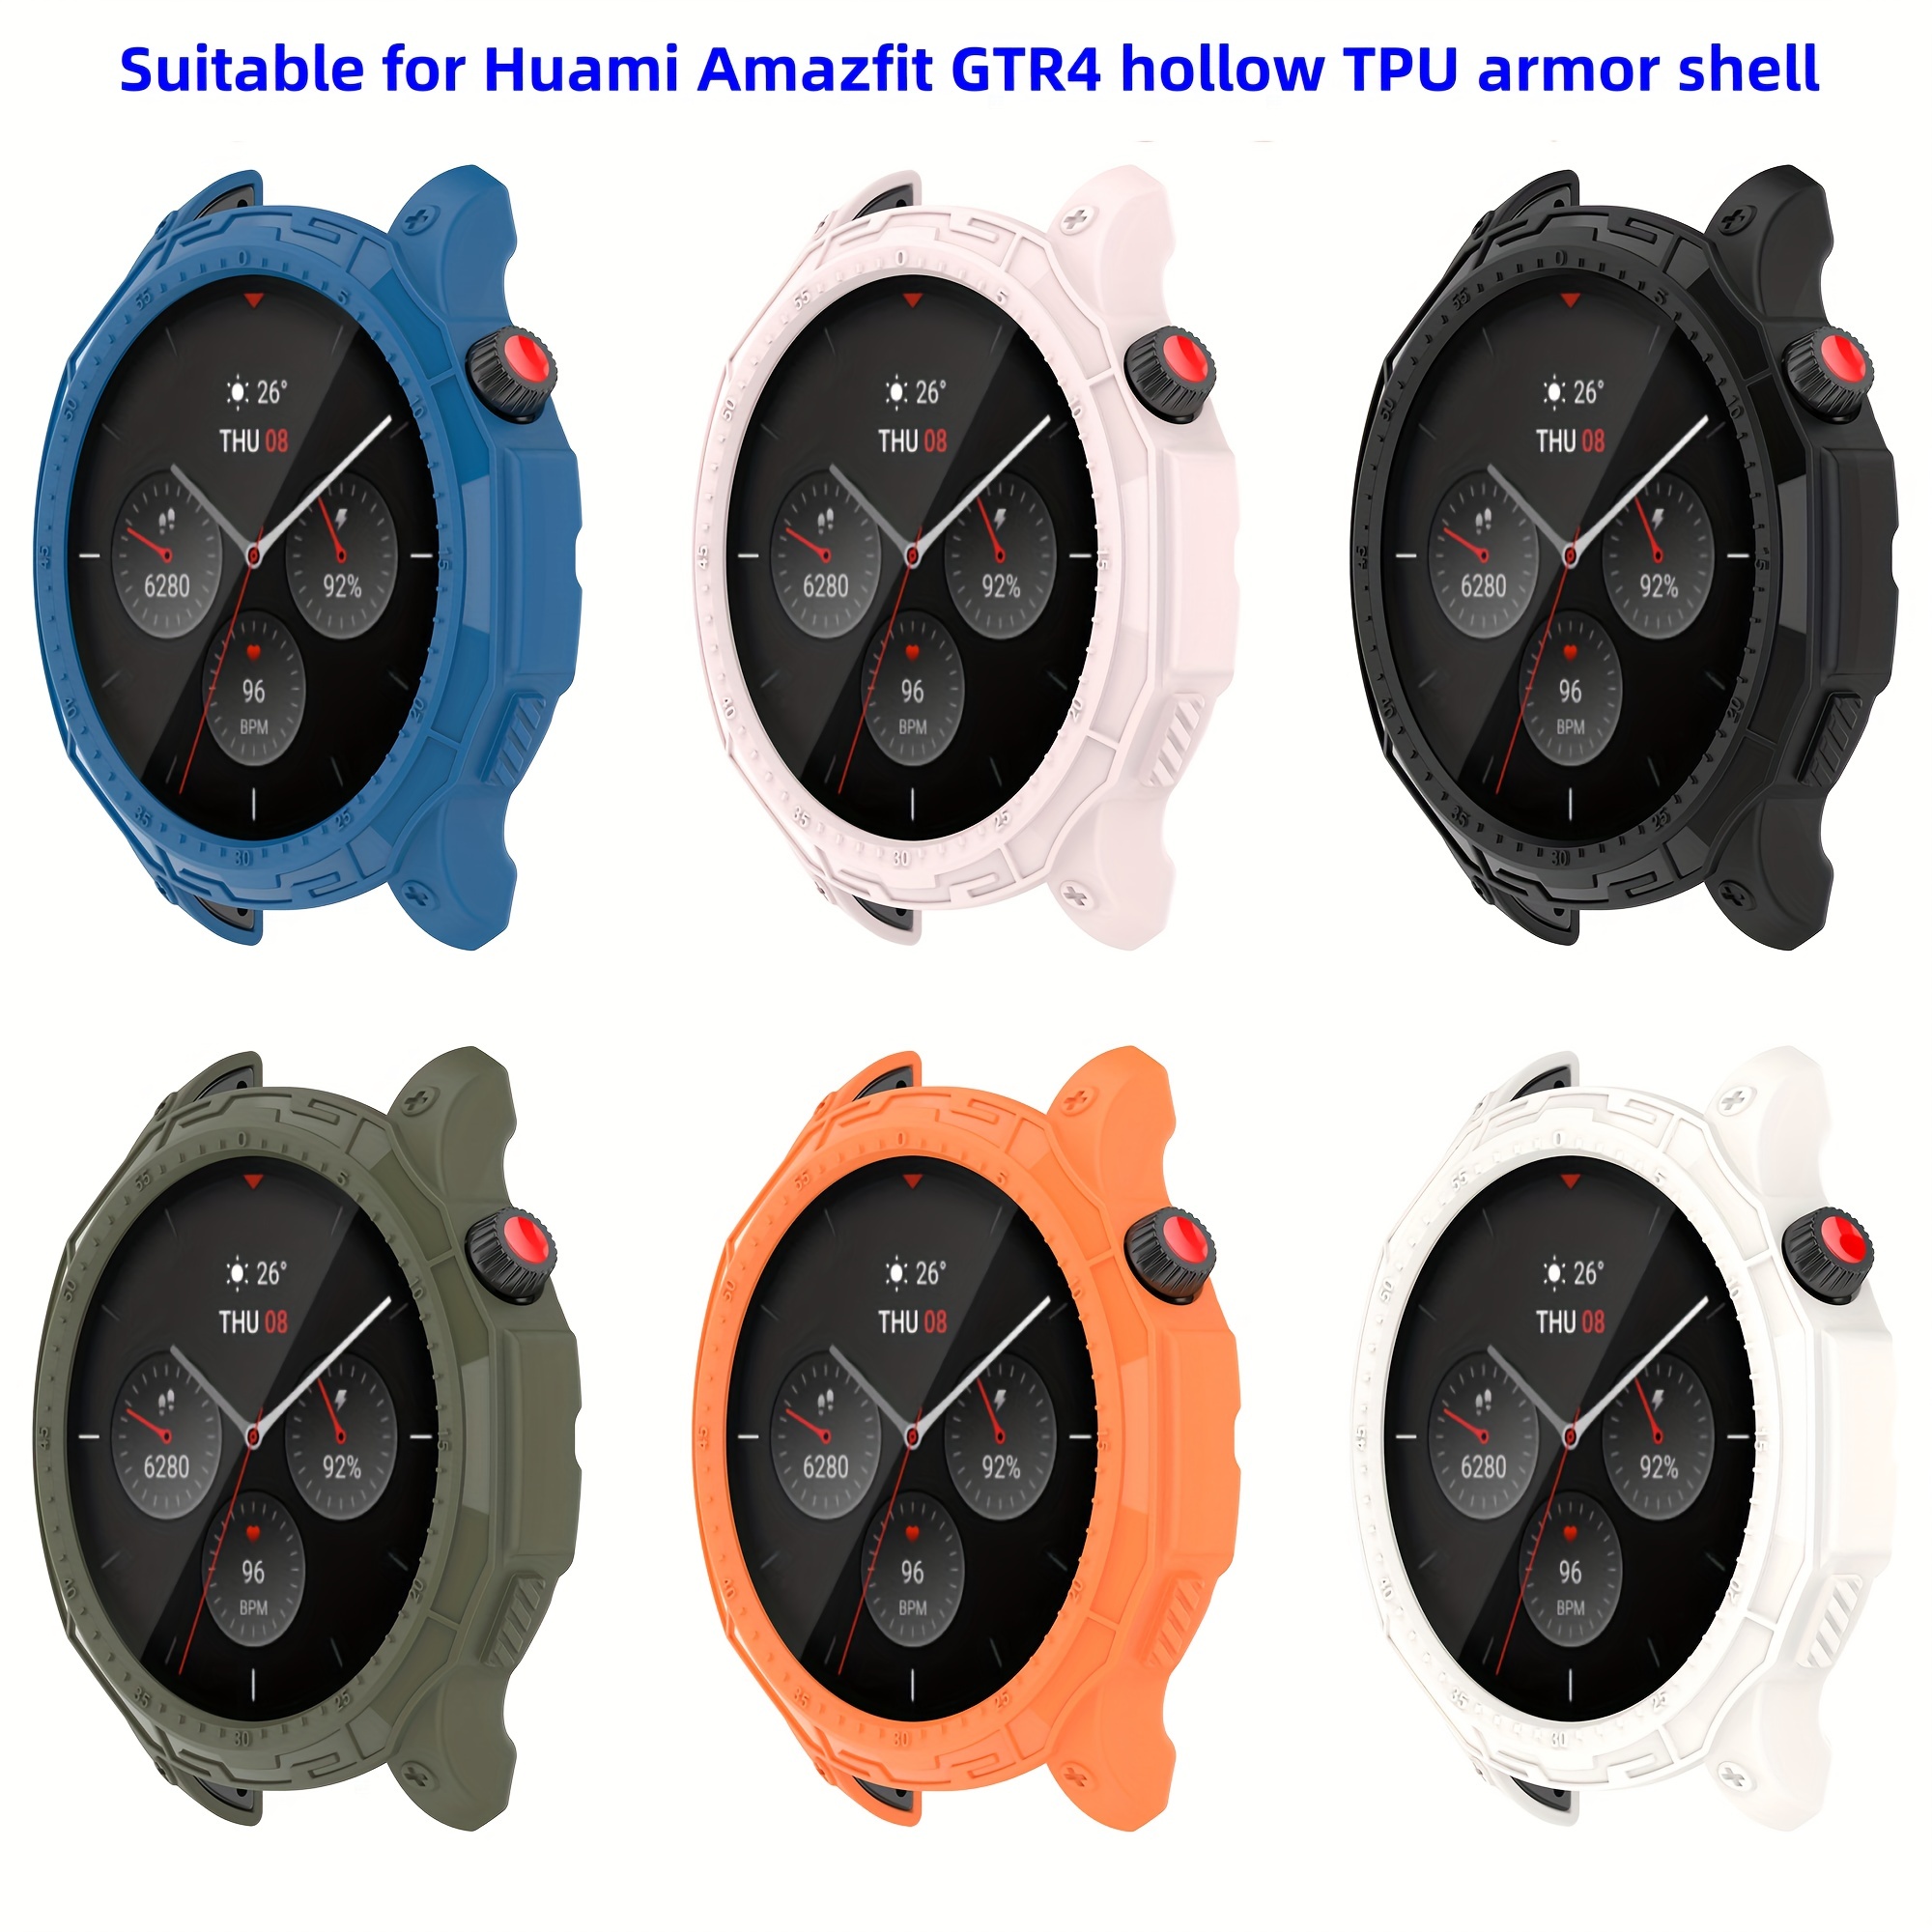 For Amazfit Gtr4 Armor Protective Shell Tpu Hollow Out Armor